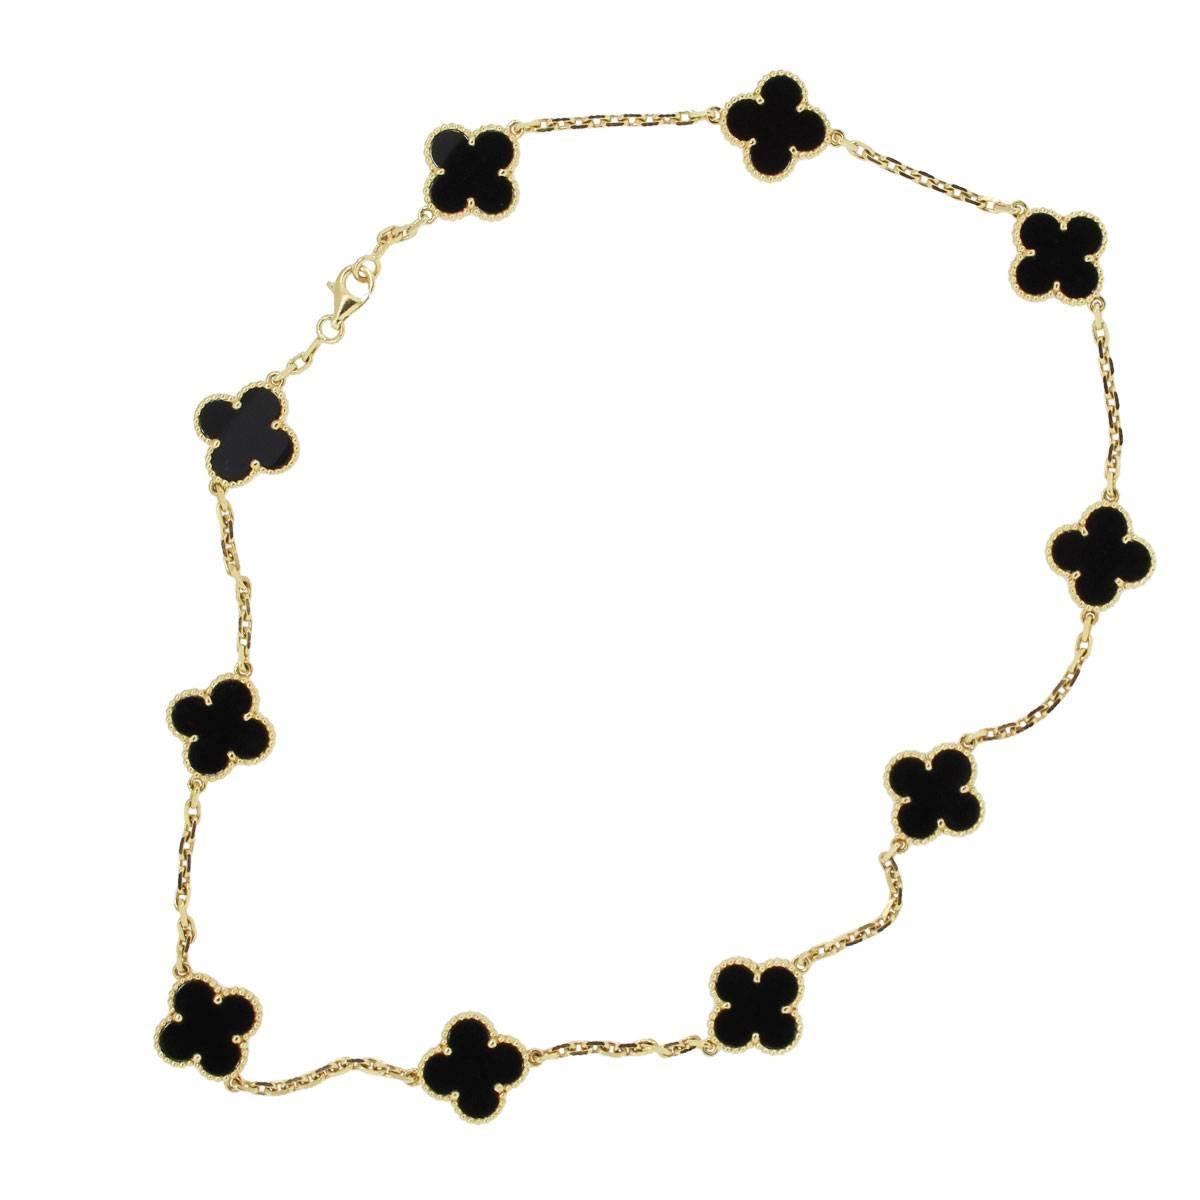 Designer	Van Cleef & Arpels
 Style	10 motif necklace
Material	18k Yellow Gold
Gemstone Details	Black Onyx
Total Weight	23.6g (15.1dwt)
Necklace Length	17''
Clasp	Spring Ring
Additional Details	This item comes with original VCA necklace